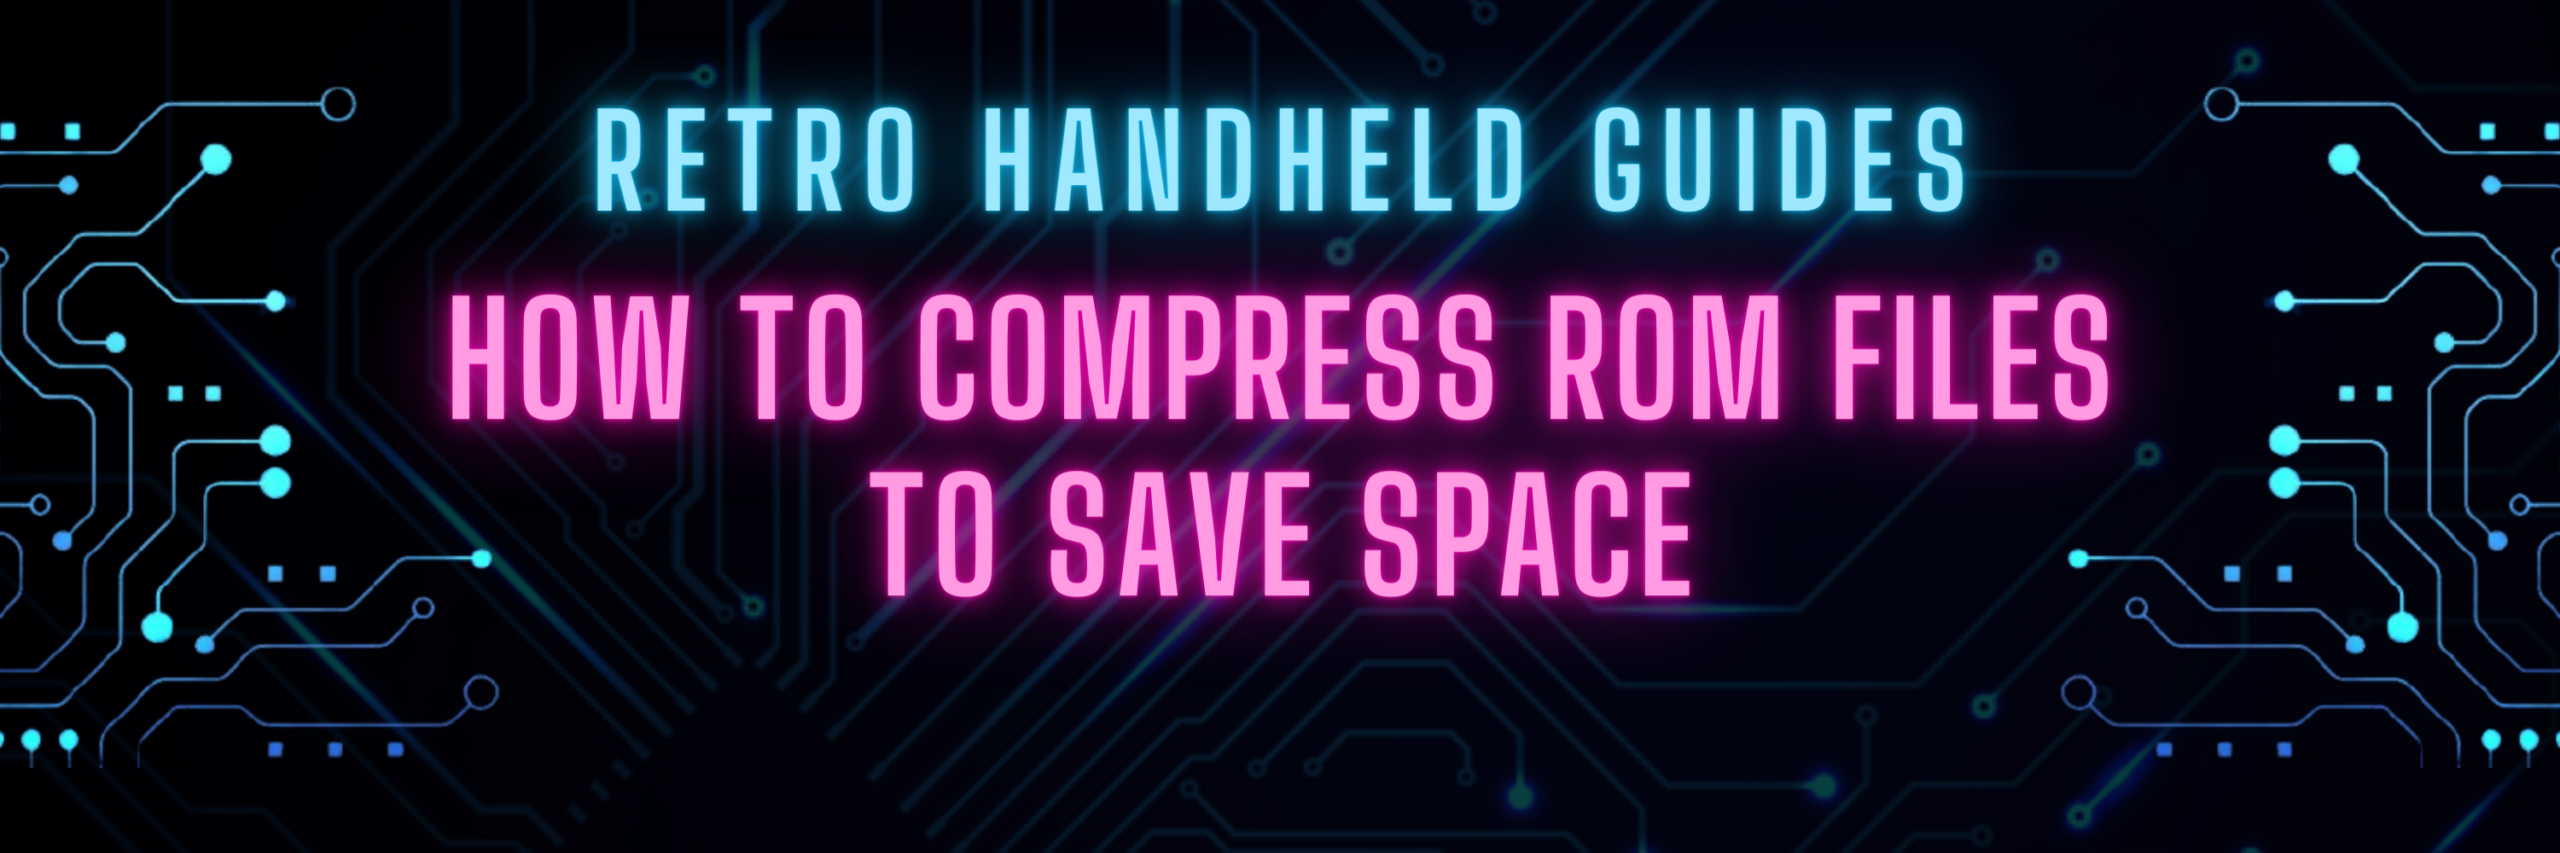 Guide How to compress ROM files to save space